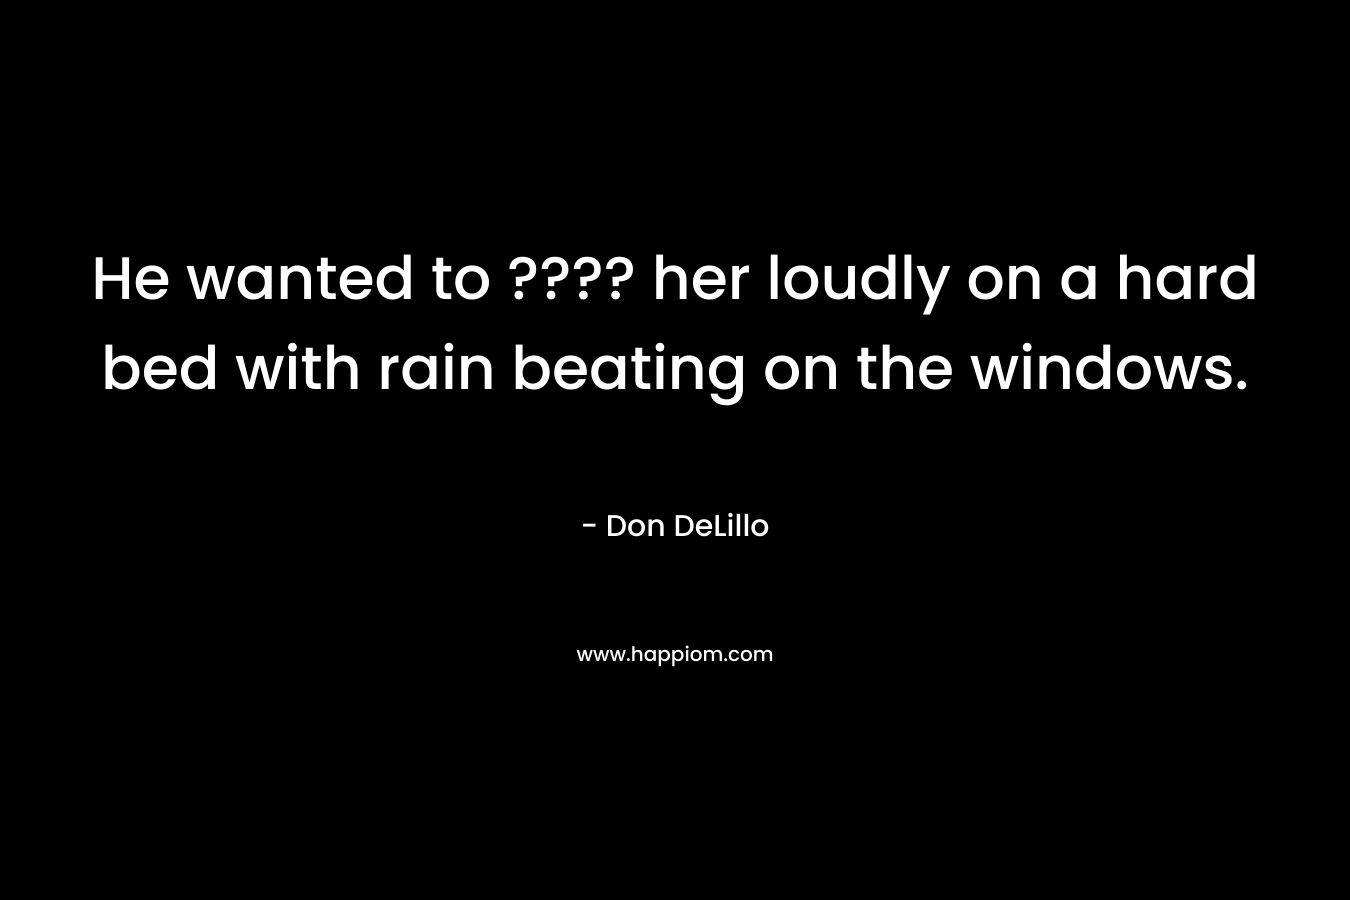 He wanted to ???? her loudly on a hard bed with rain beating on the windows.